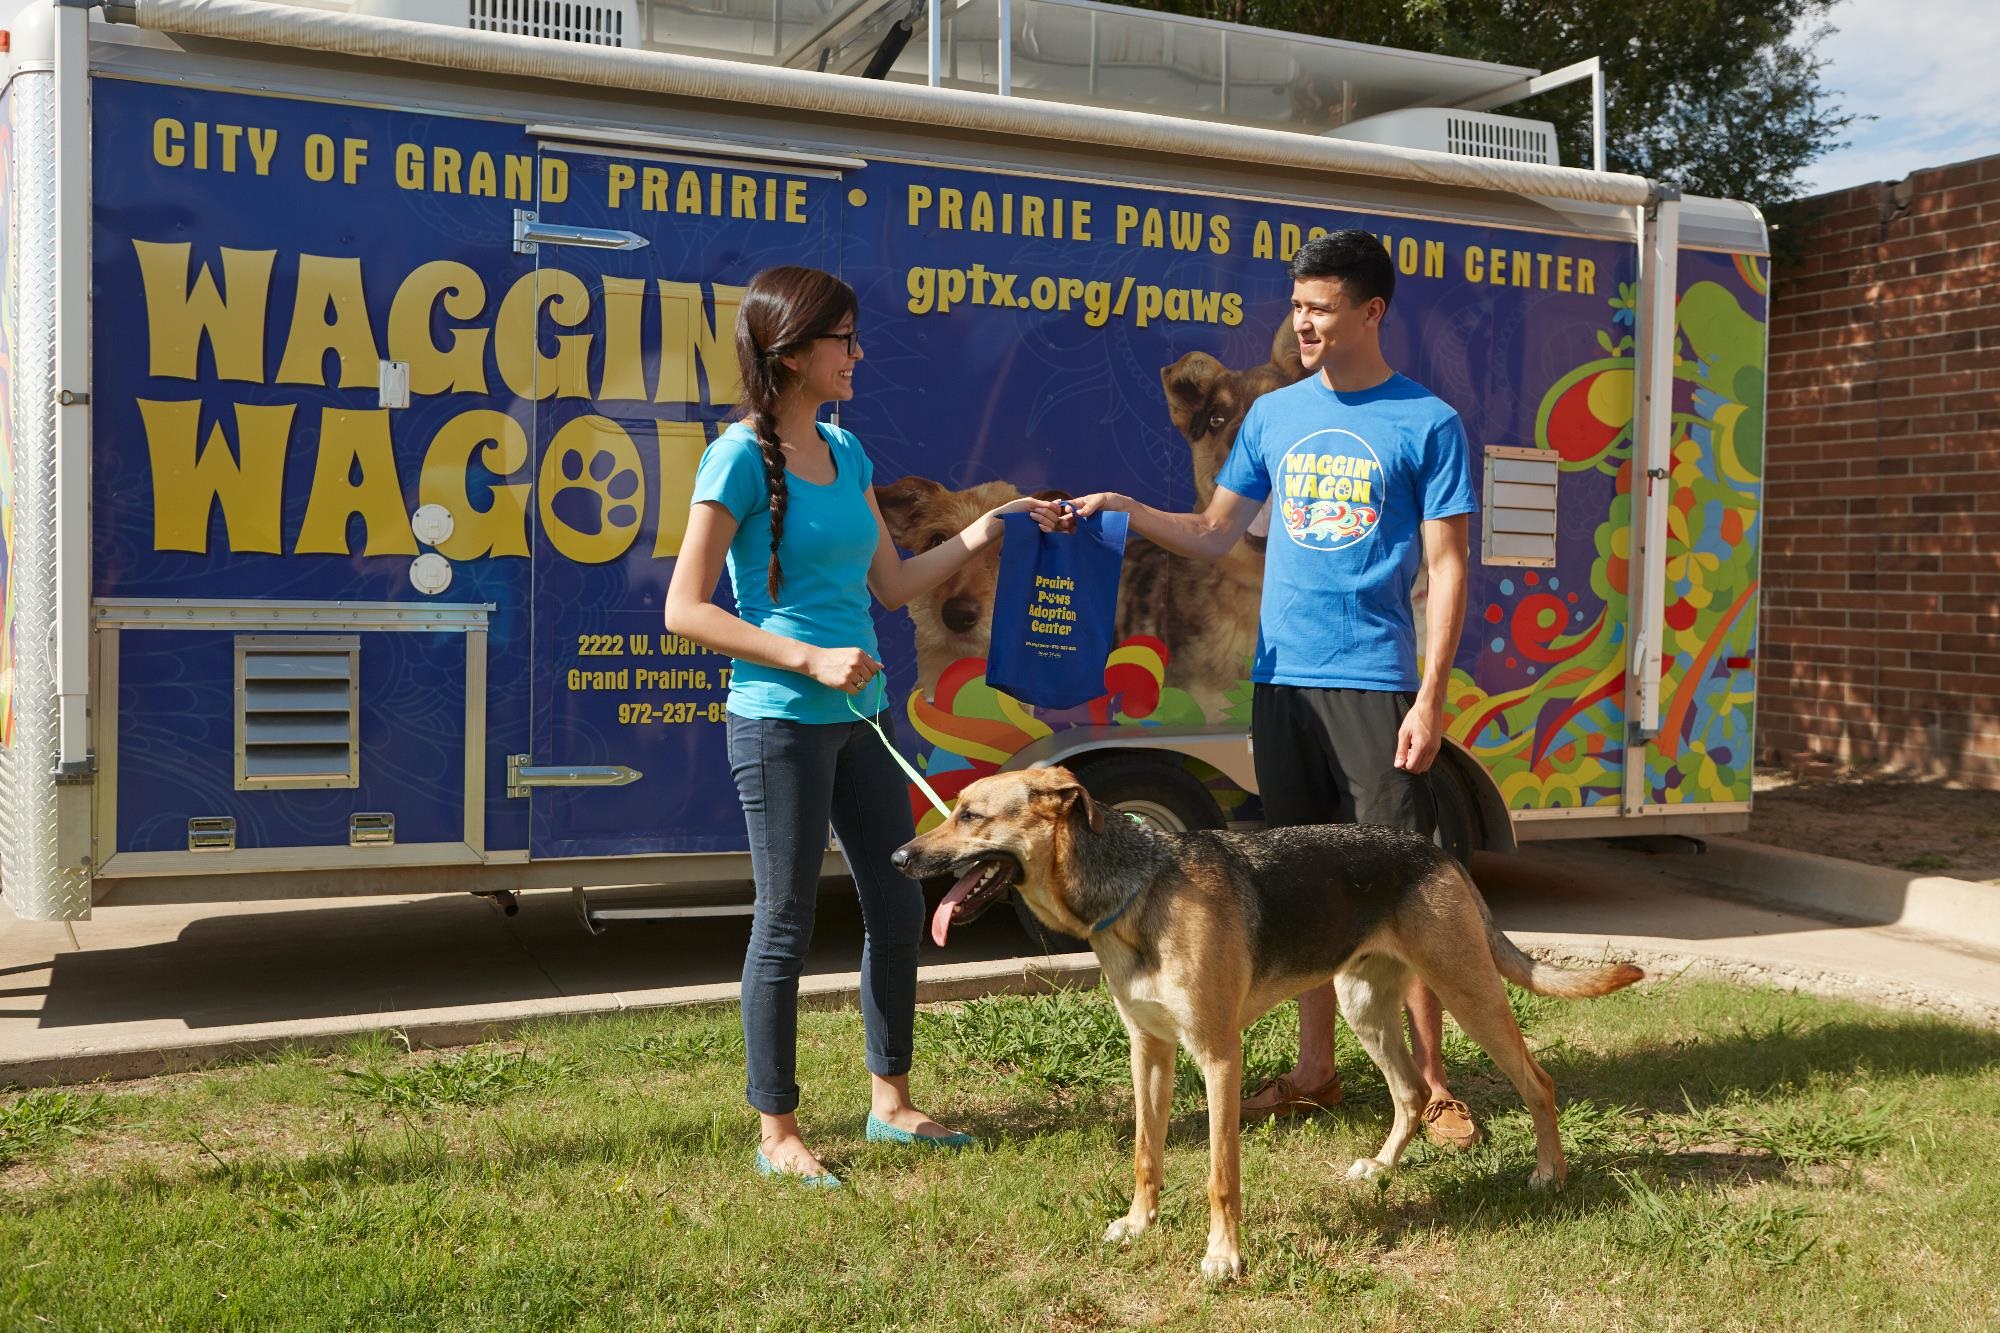 Two people and a dog are standing in front of the Waggin Wagon